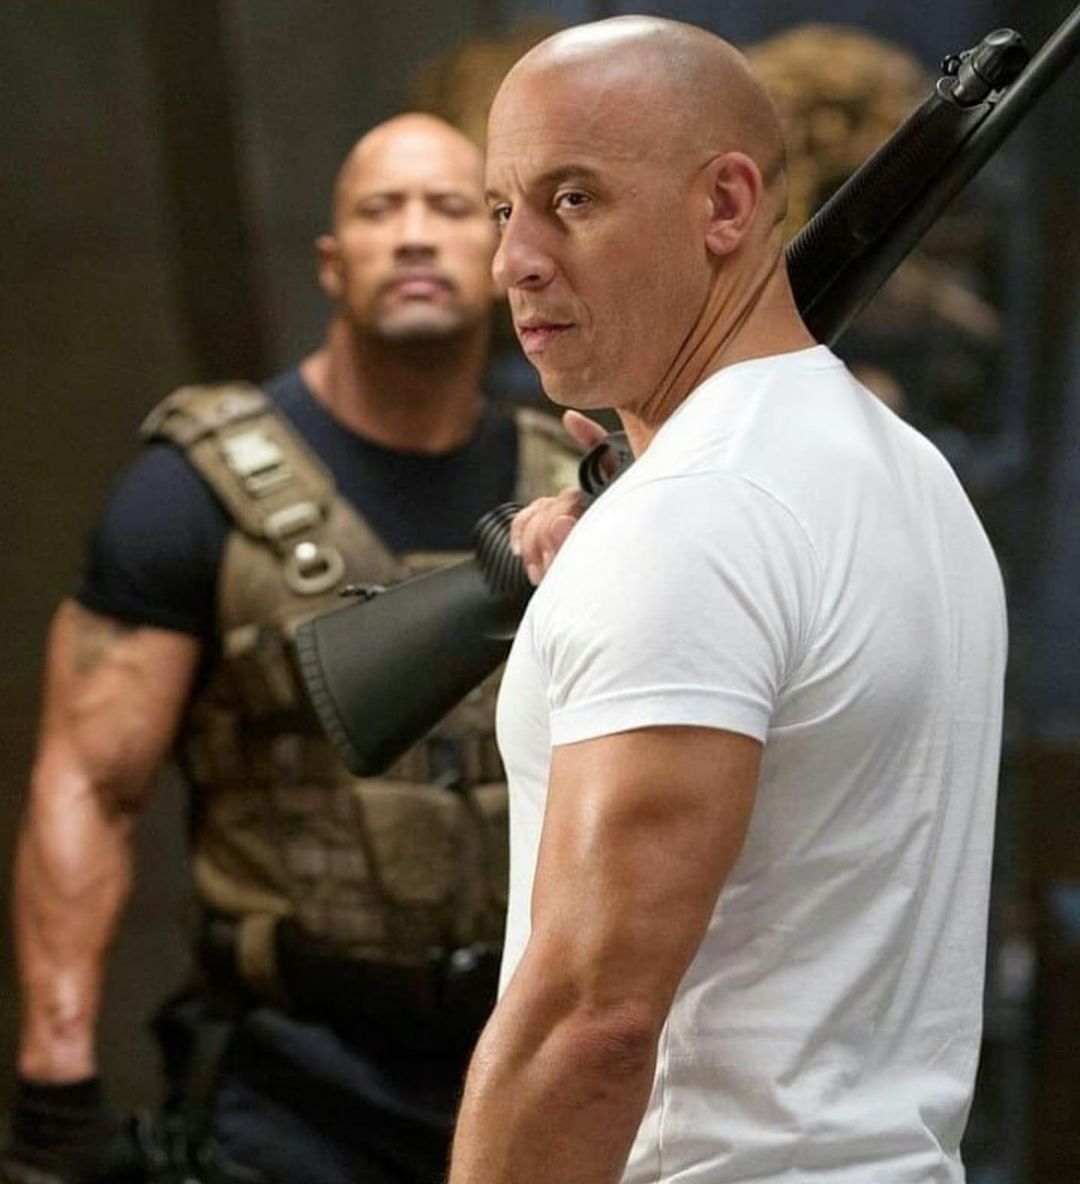 &apos;BuzzScreenReview: Fast and Furious 9